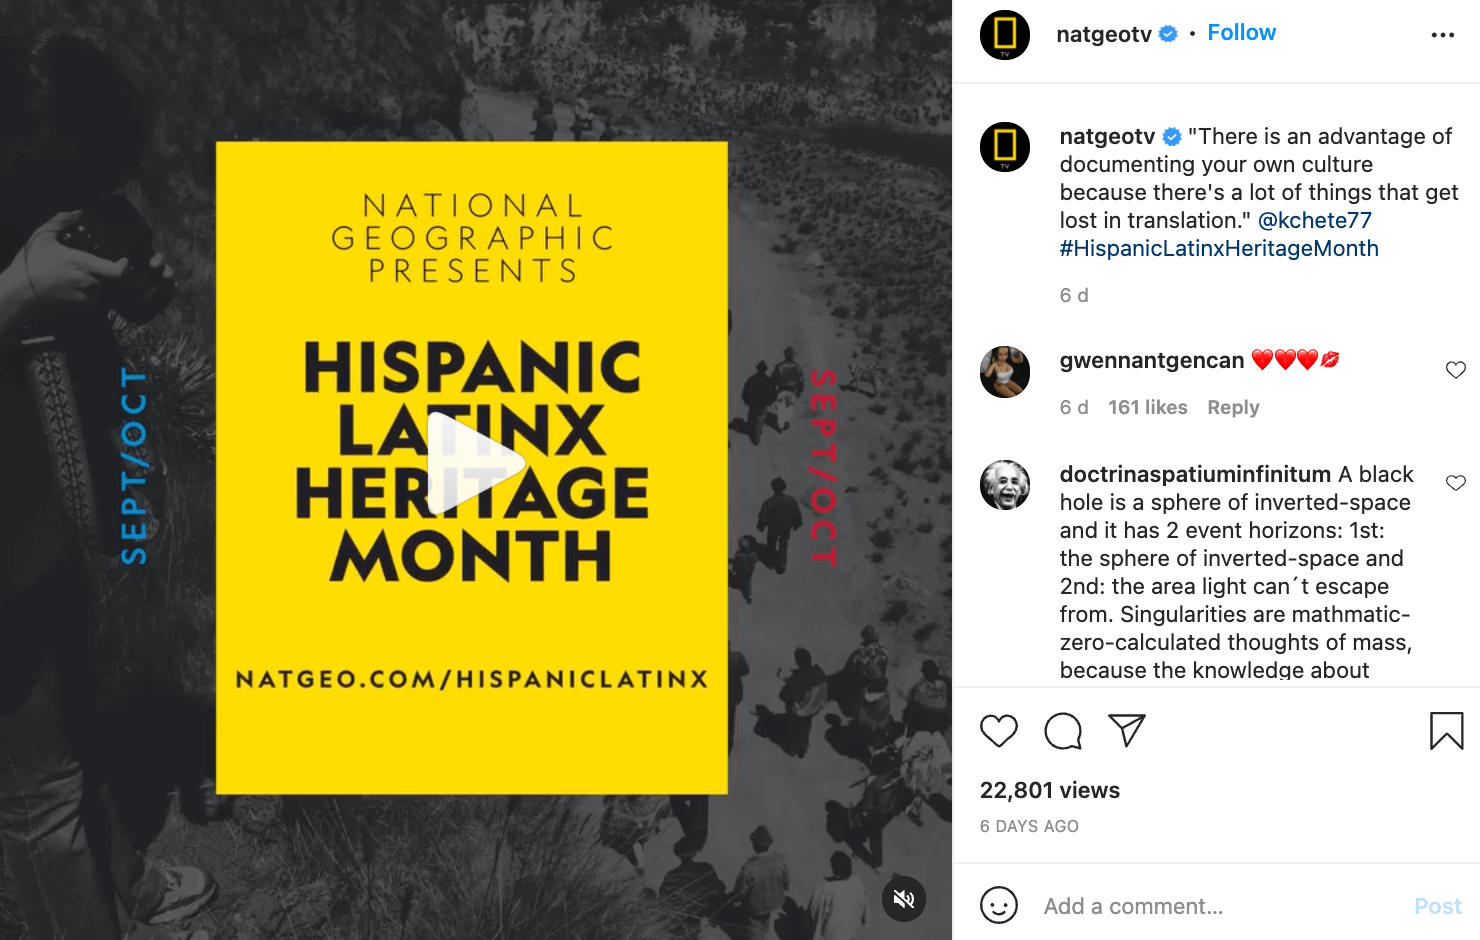 This is an Instagram post related to one of National Geographic's social media campaigns.